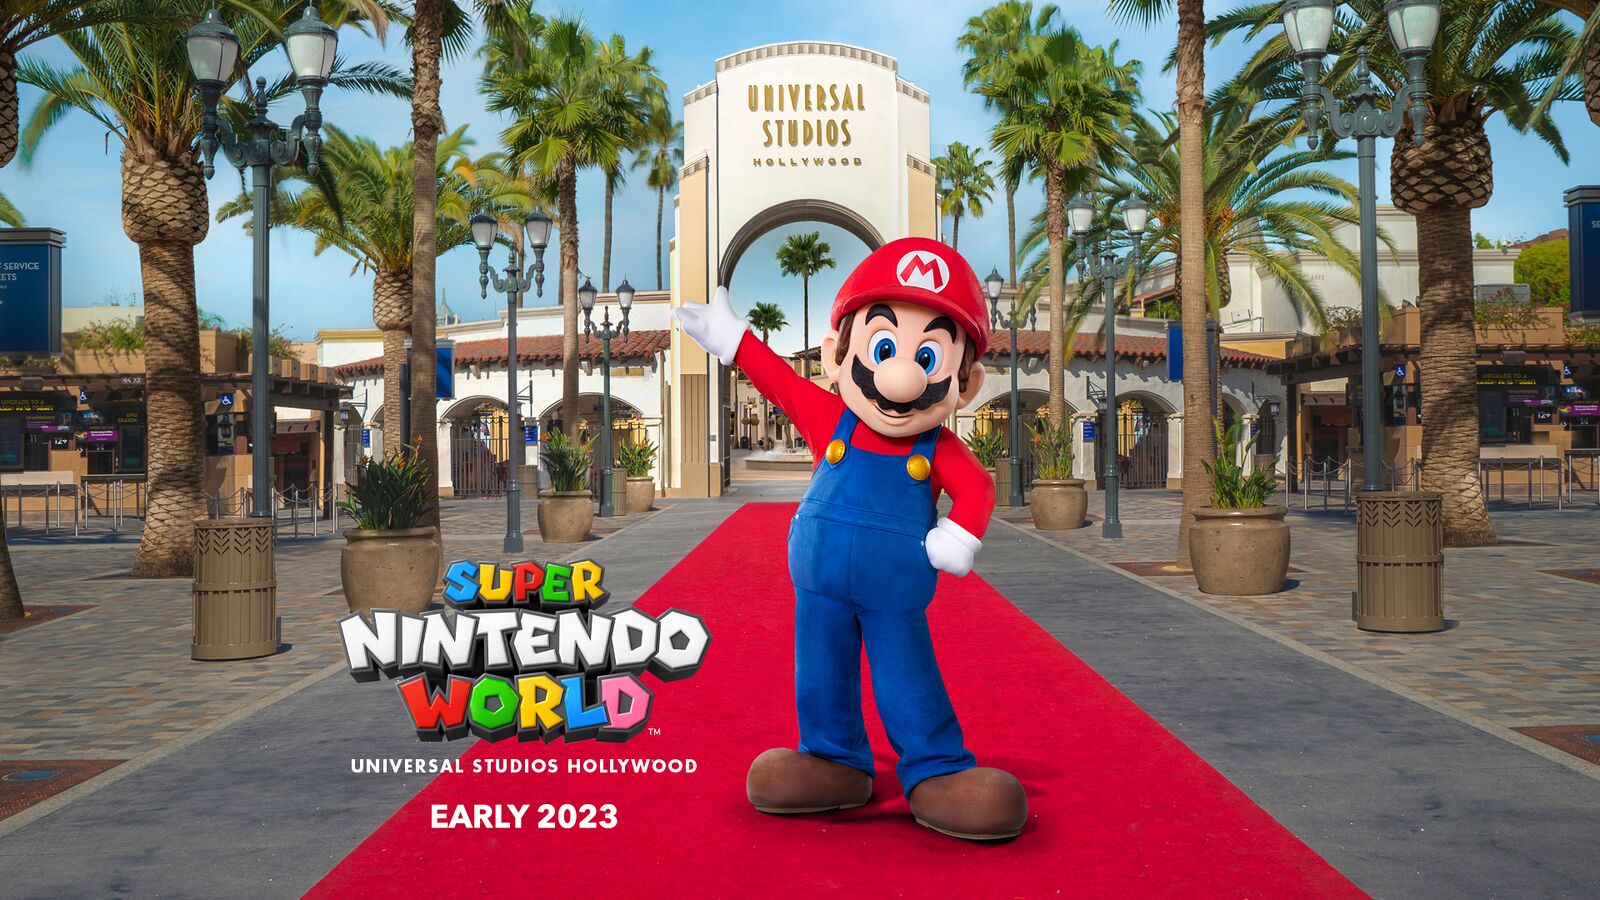 1600px-SNW_Universal_Studios_Hollywood_announcement_early_2023_a.jpg